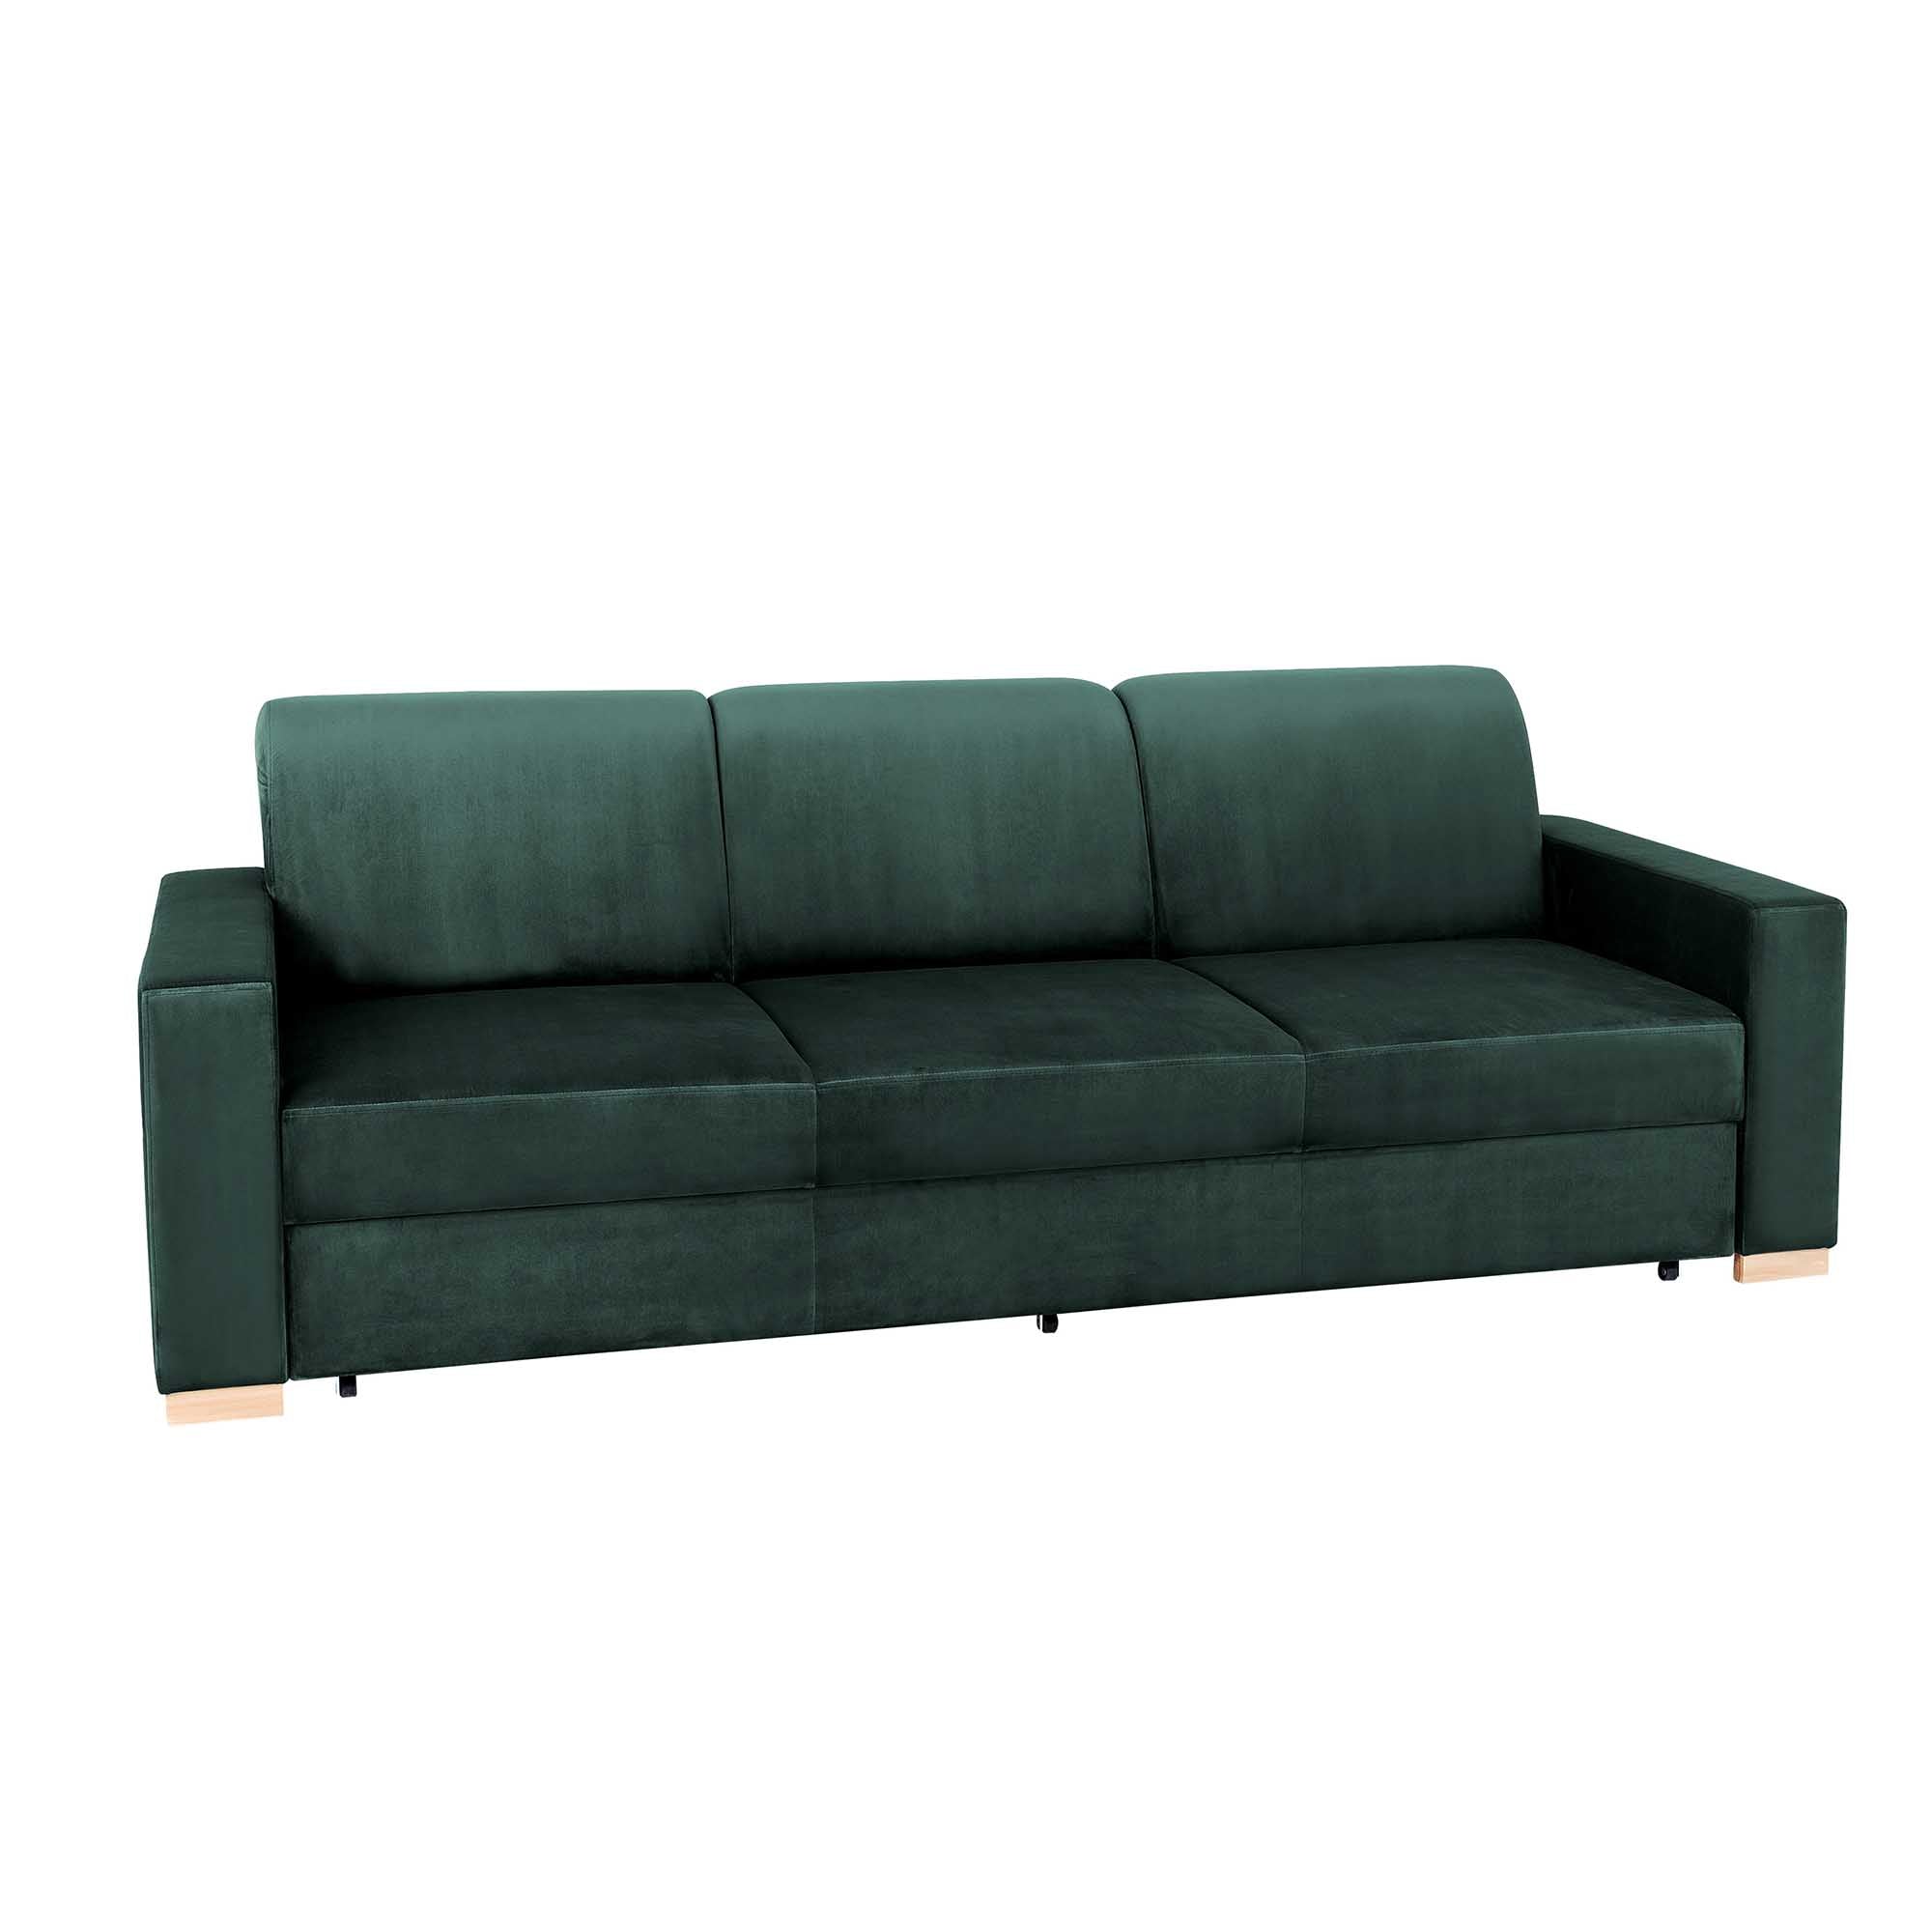 STABLE Sofa 3 Seaters upholstery colour avocado front view